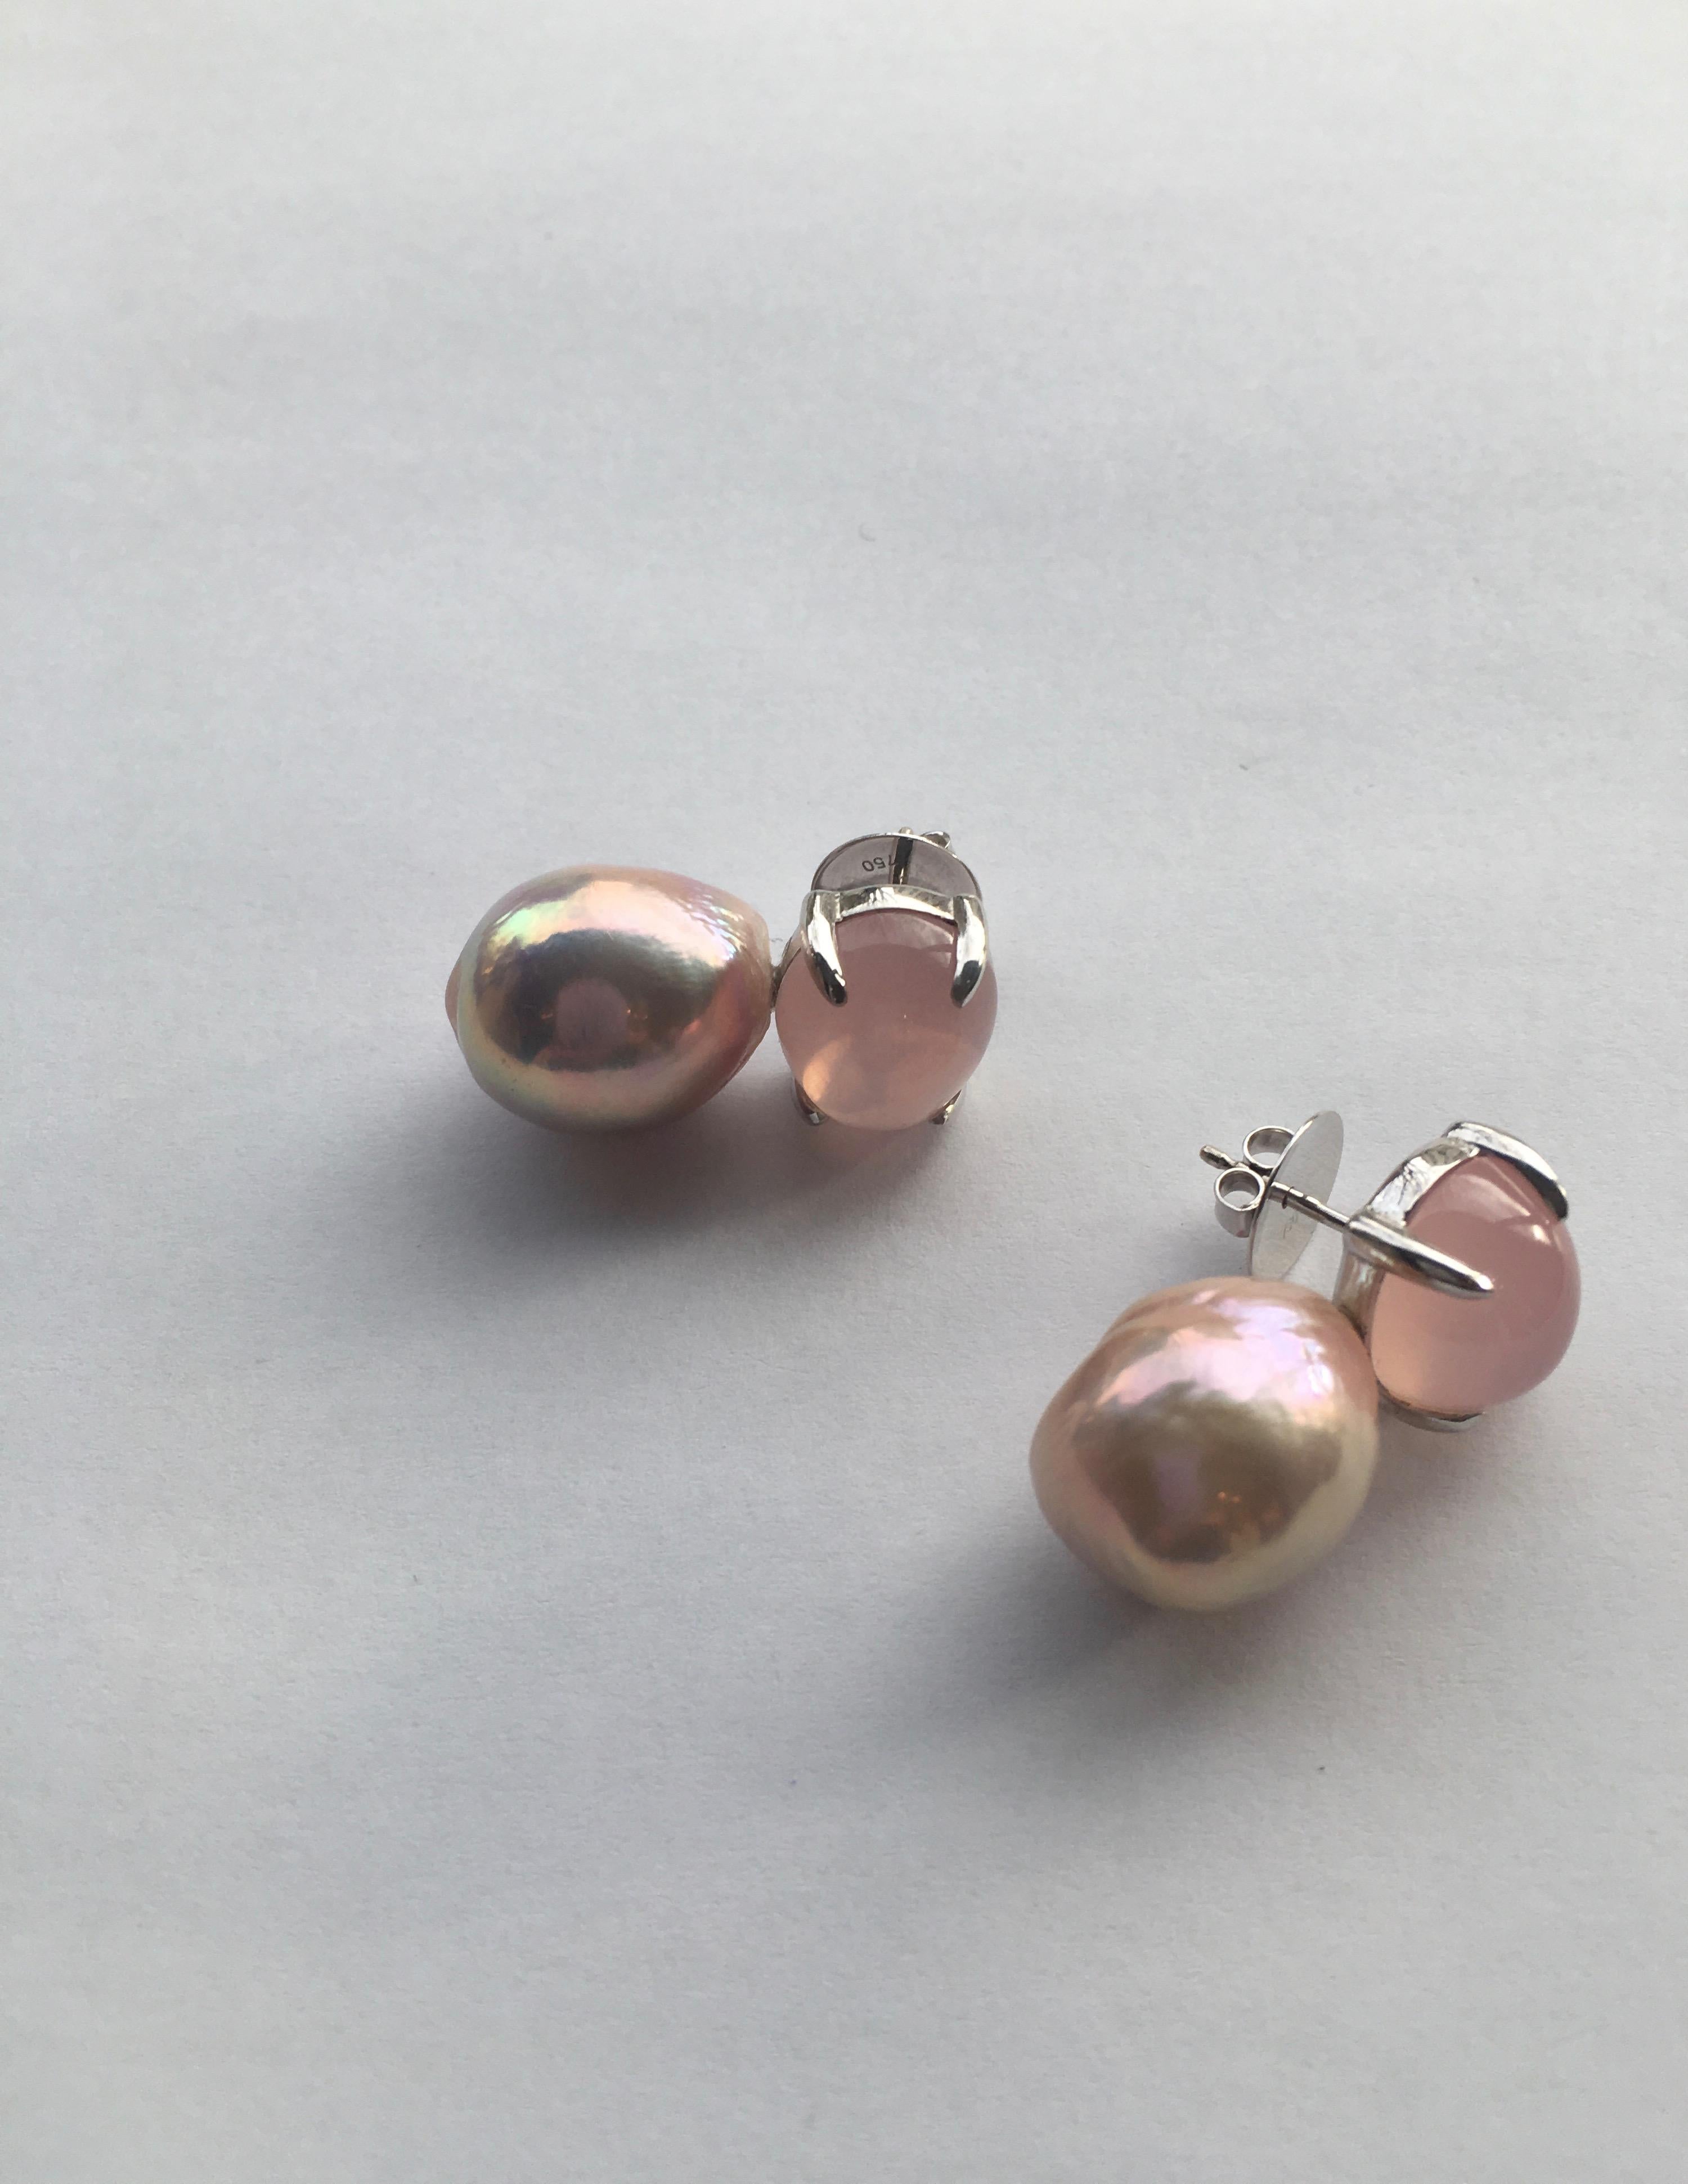 A pair of earrings with rose quartz cabochons and beautiful baroque pink freshwater pearls.  Set in 18 Karat white gold these simple yet distinct earrings are for the sophisticated pearl lover.  Adding a touch of freshness with the pink tones they